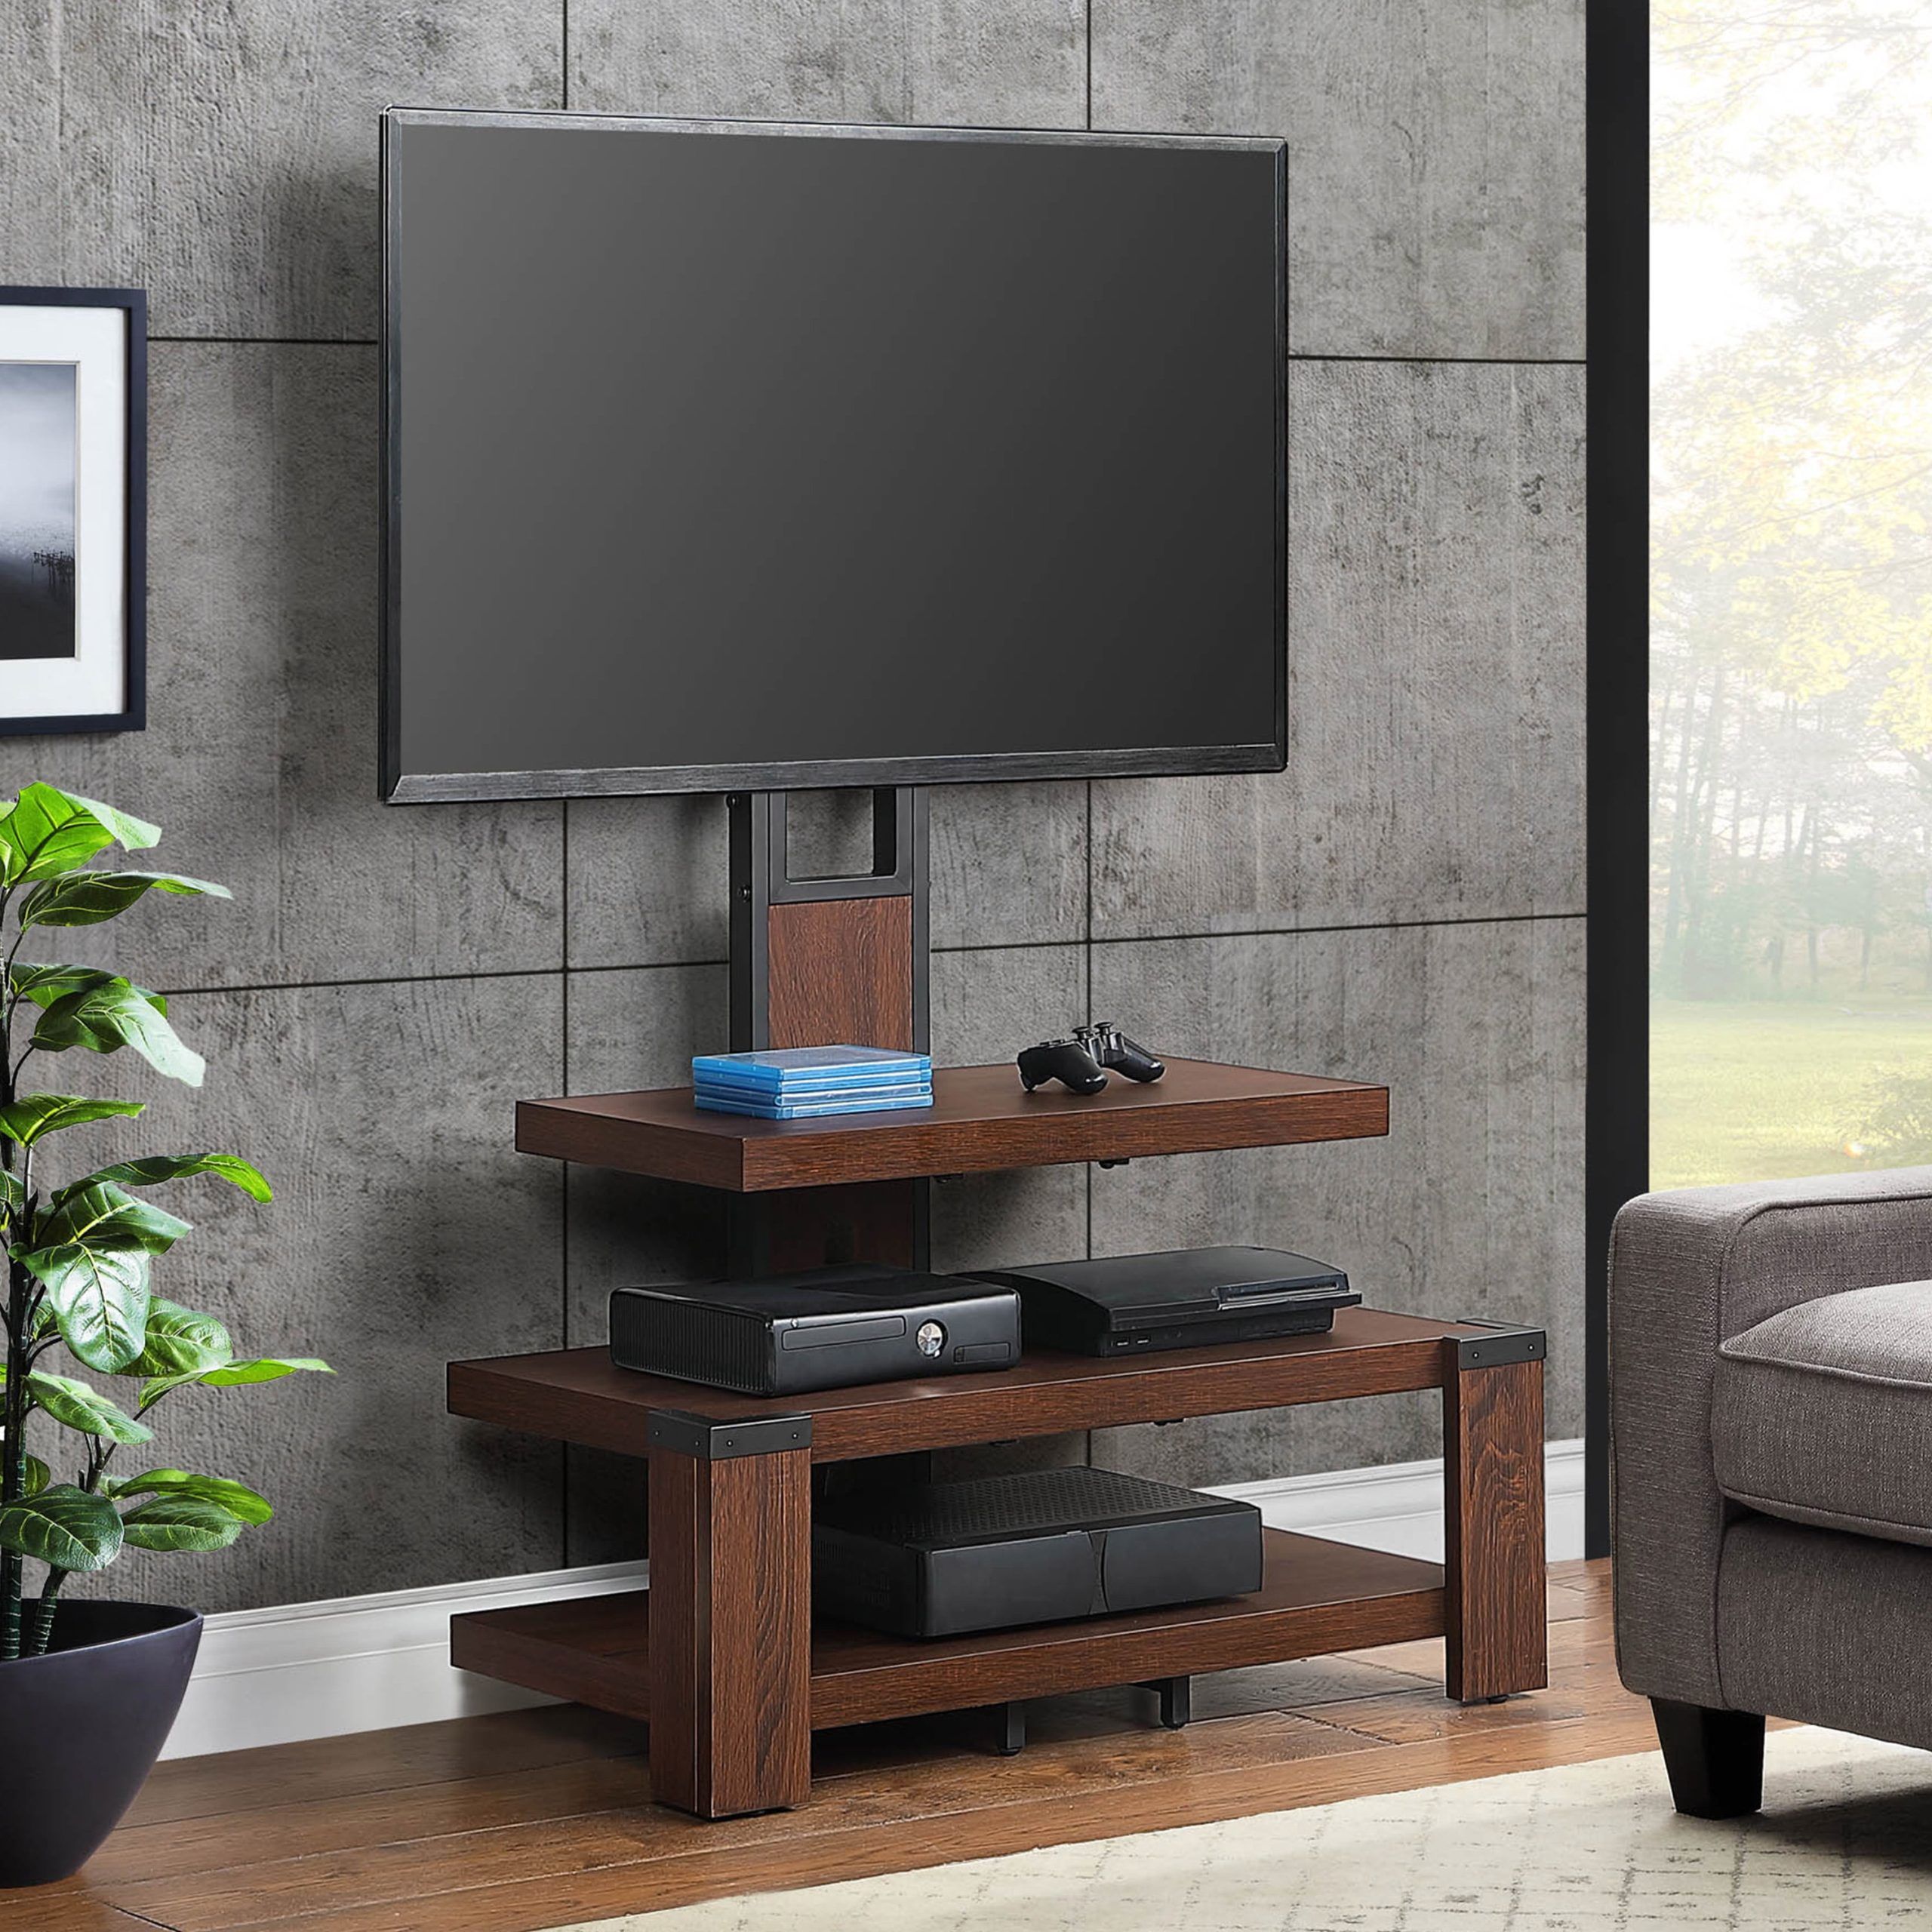 Whalen 3 Shelf Television Stand With Floater Mount For Tvs Up To 55 Inside Glass Shelves Tv Stands (View 17 of 20)